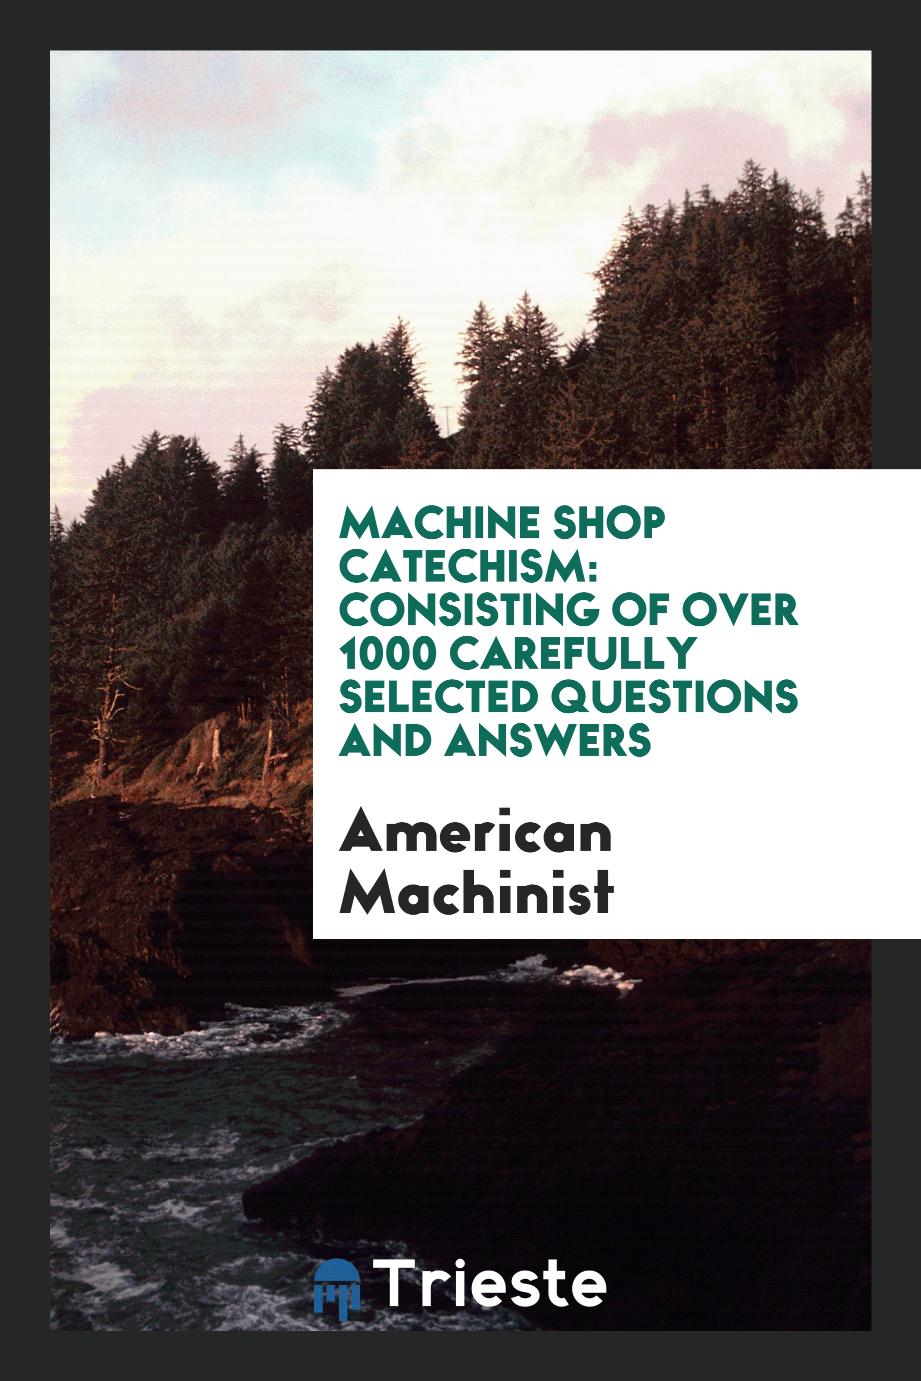 American Machinist - Machine Shop Catechism: Consisting of Over 1000 Carefully Selected Questions and Answers